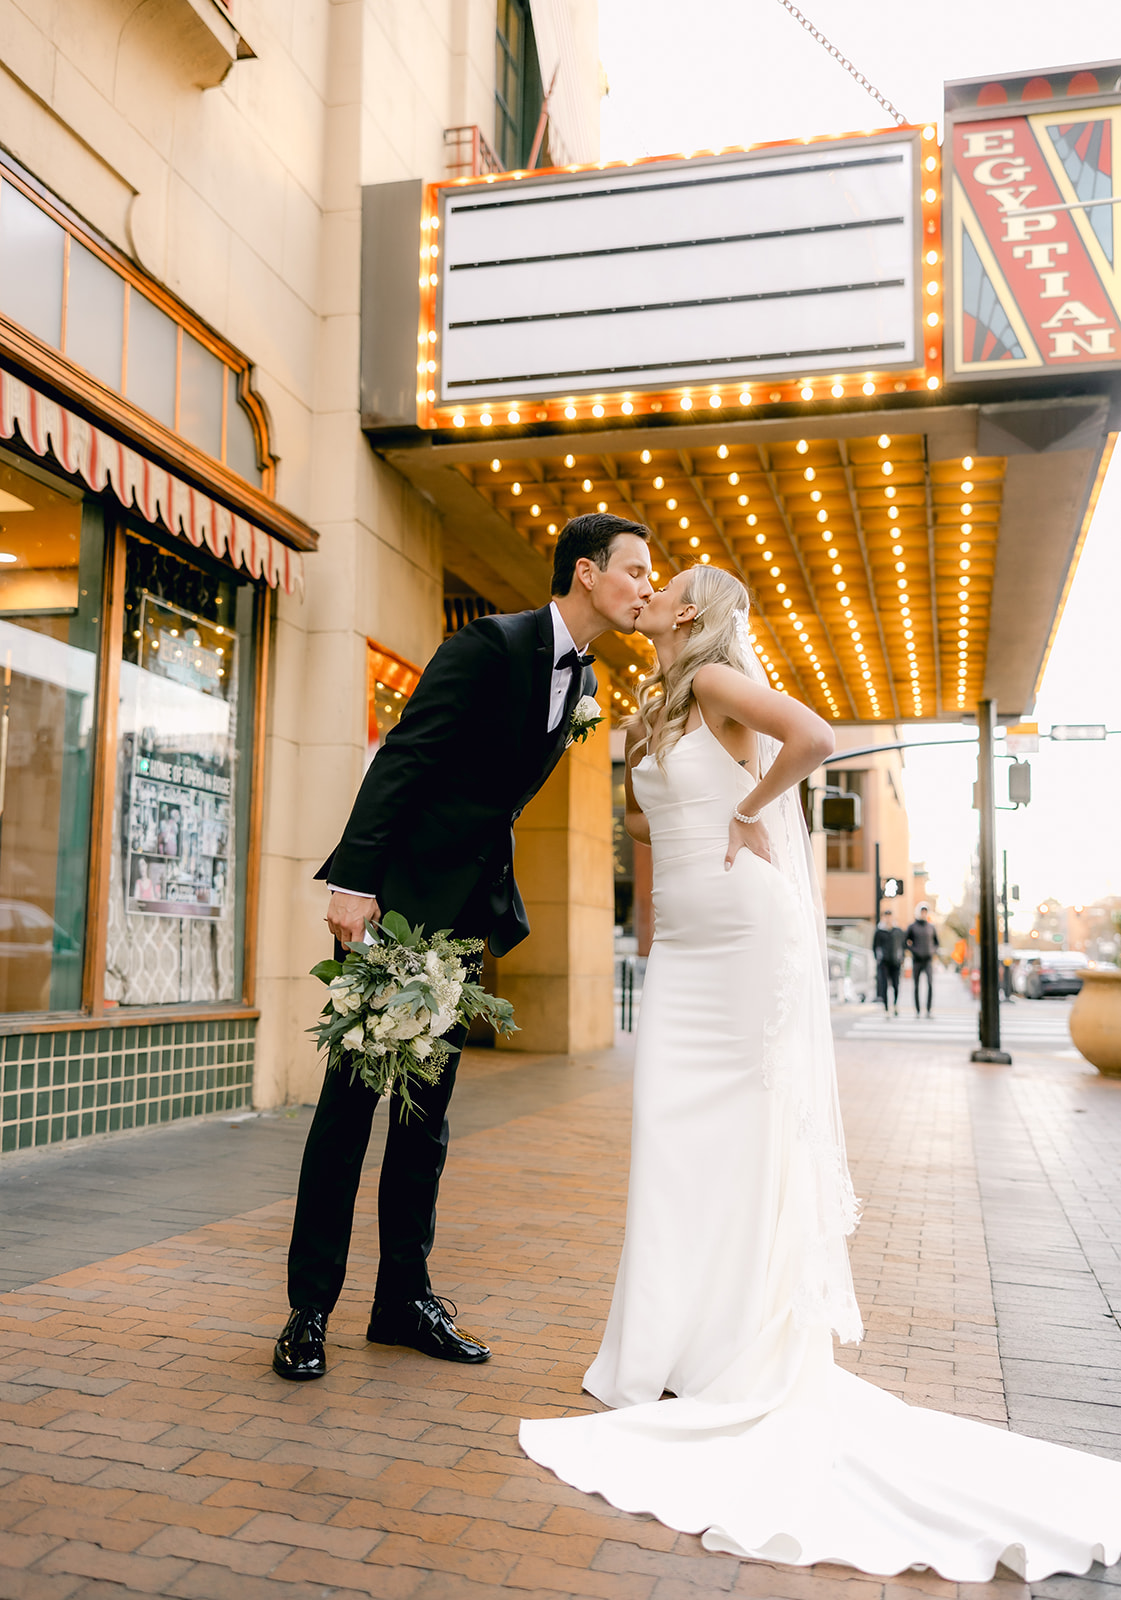 Old Hollywood Wedding at The Grove Hotel in Idaho